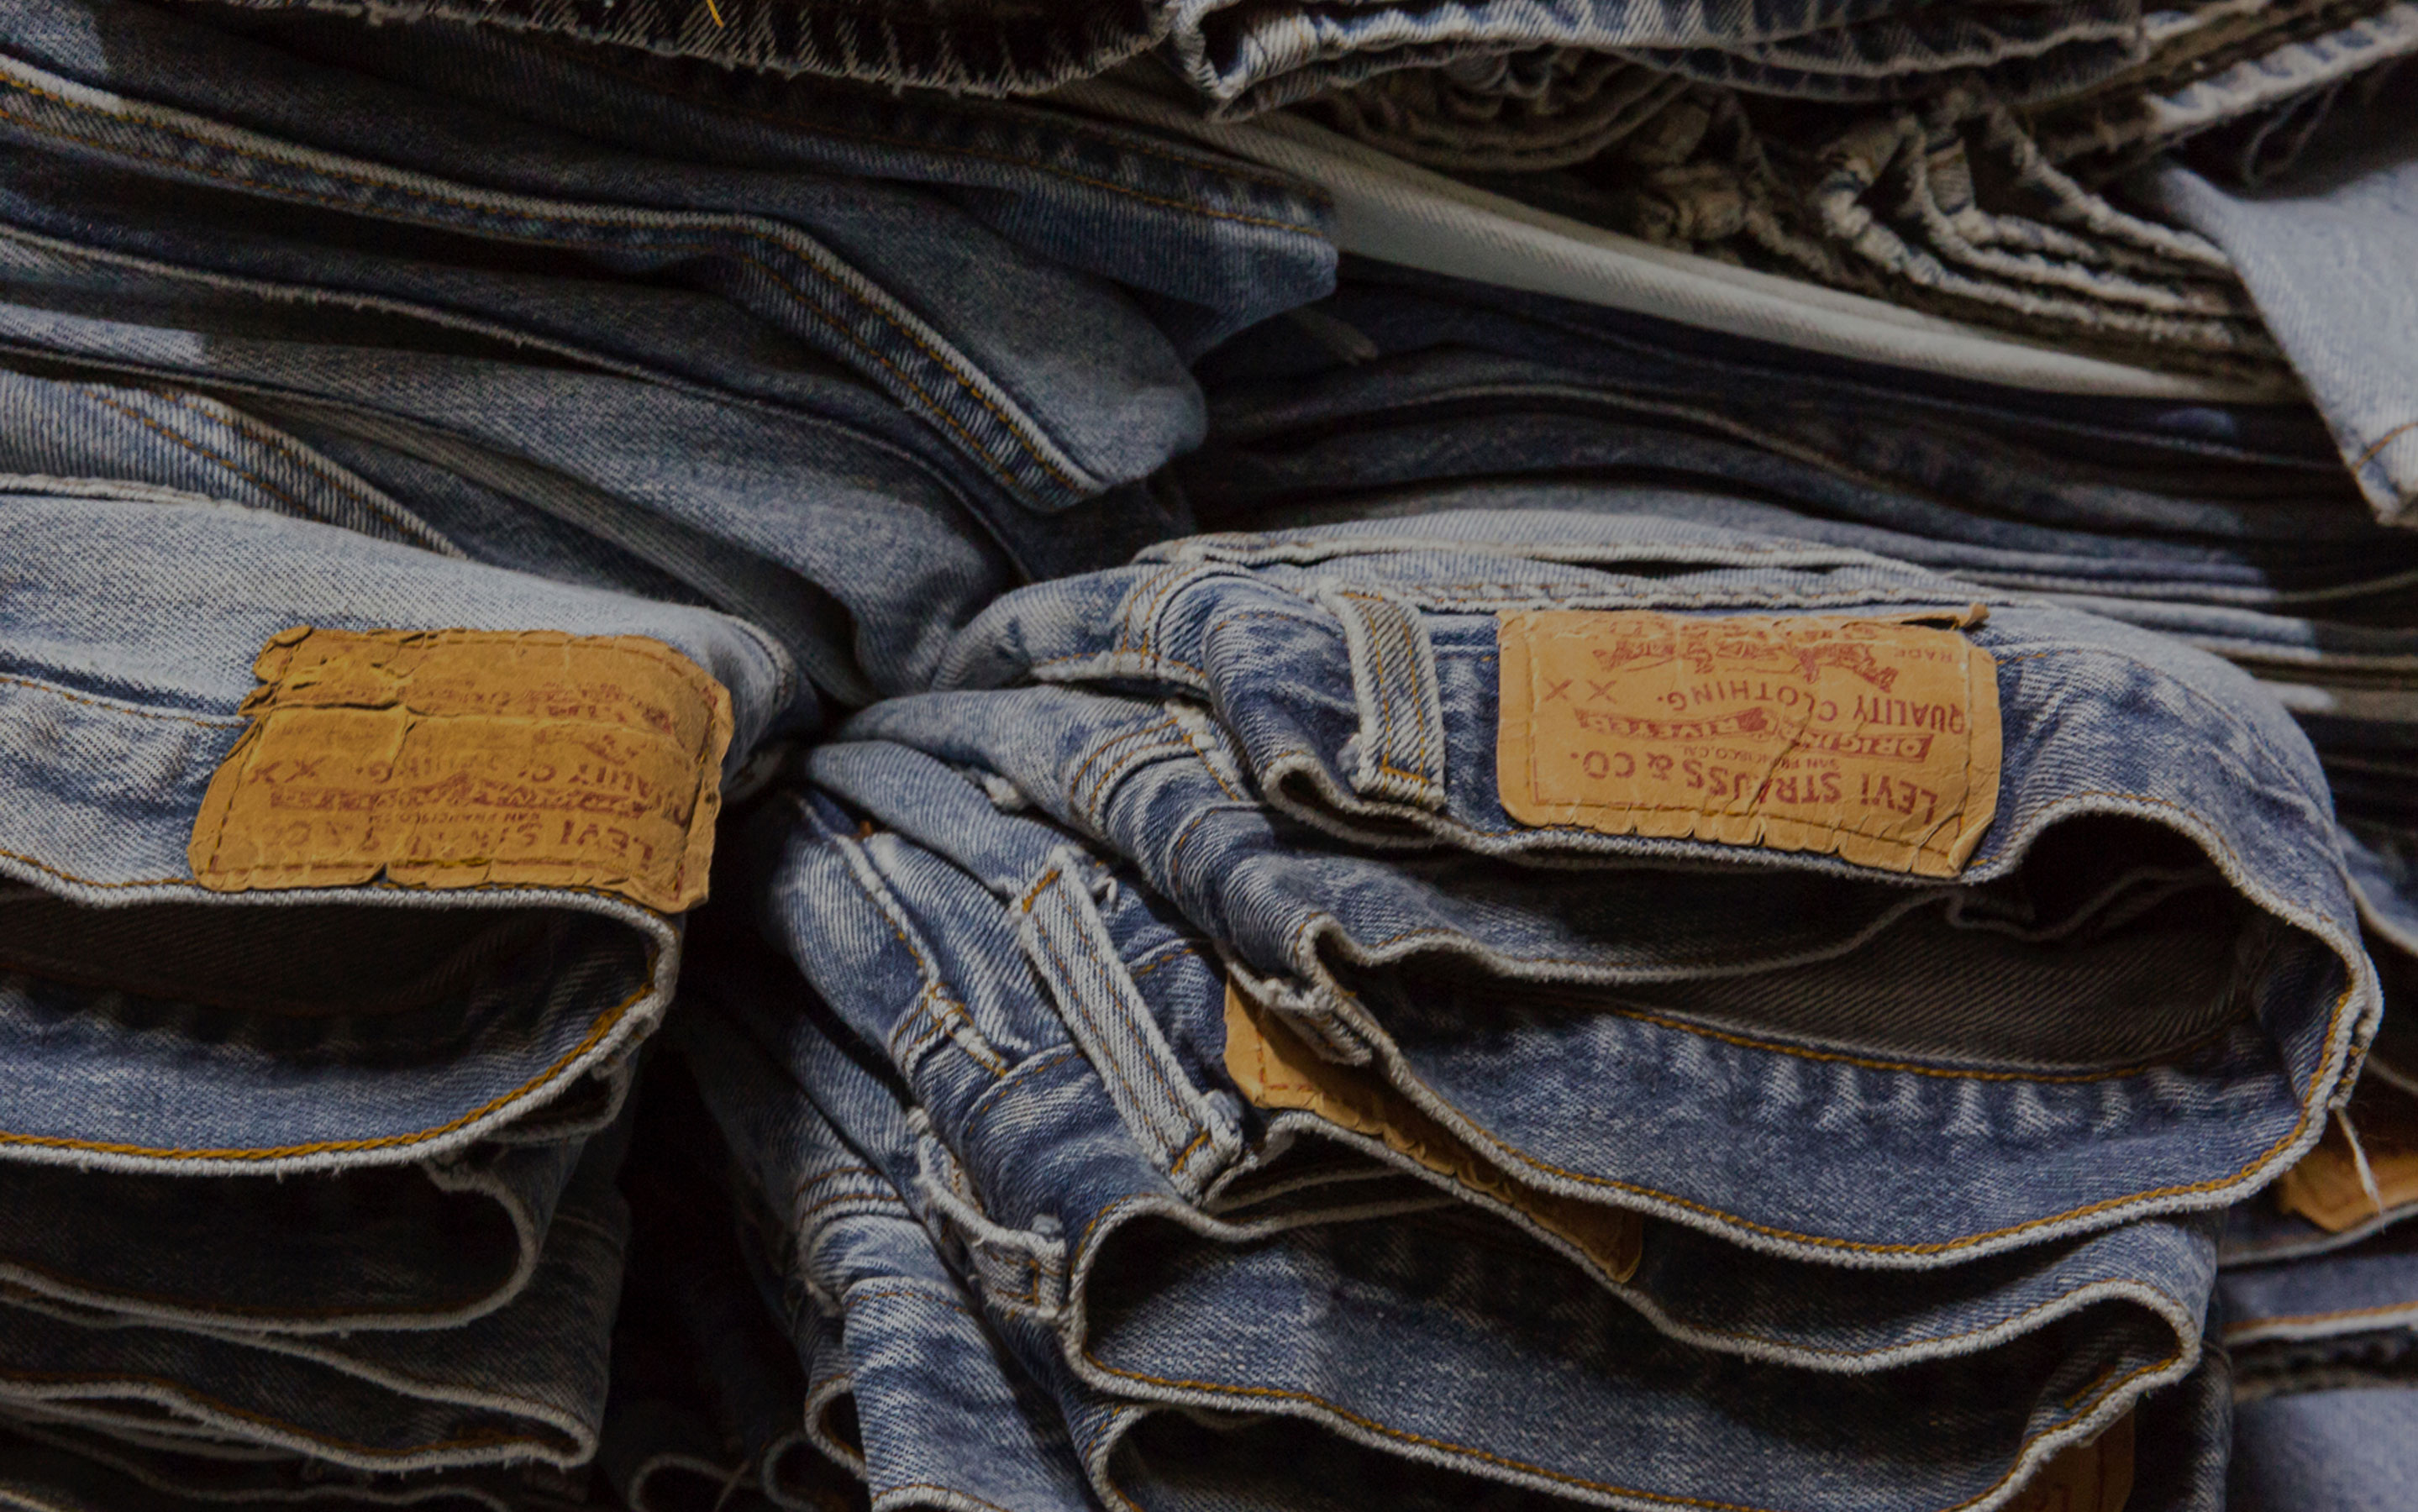 levis jeans exchange for old jean